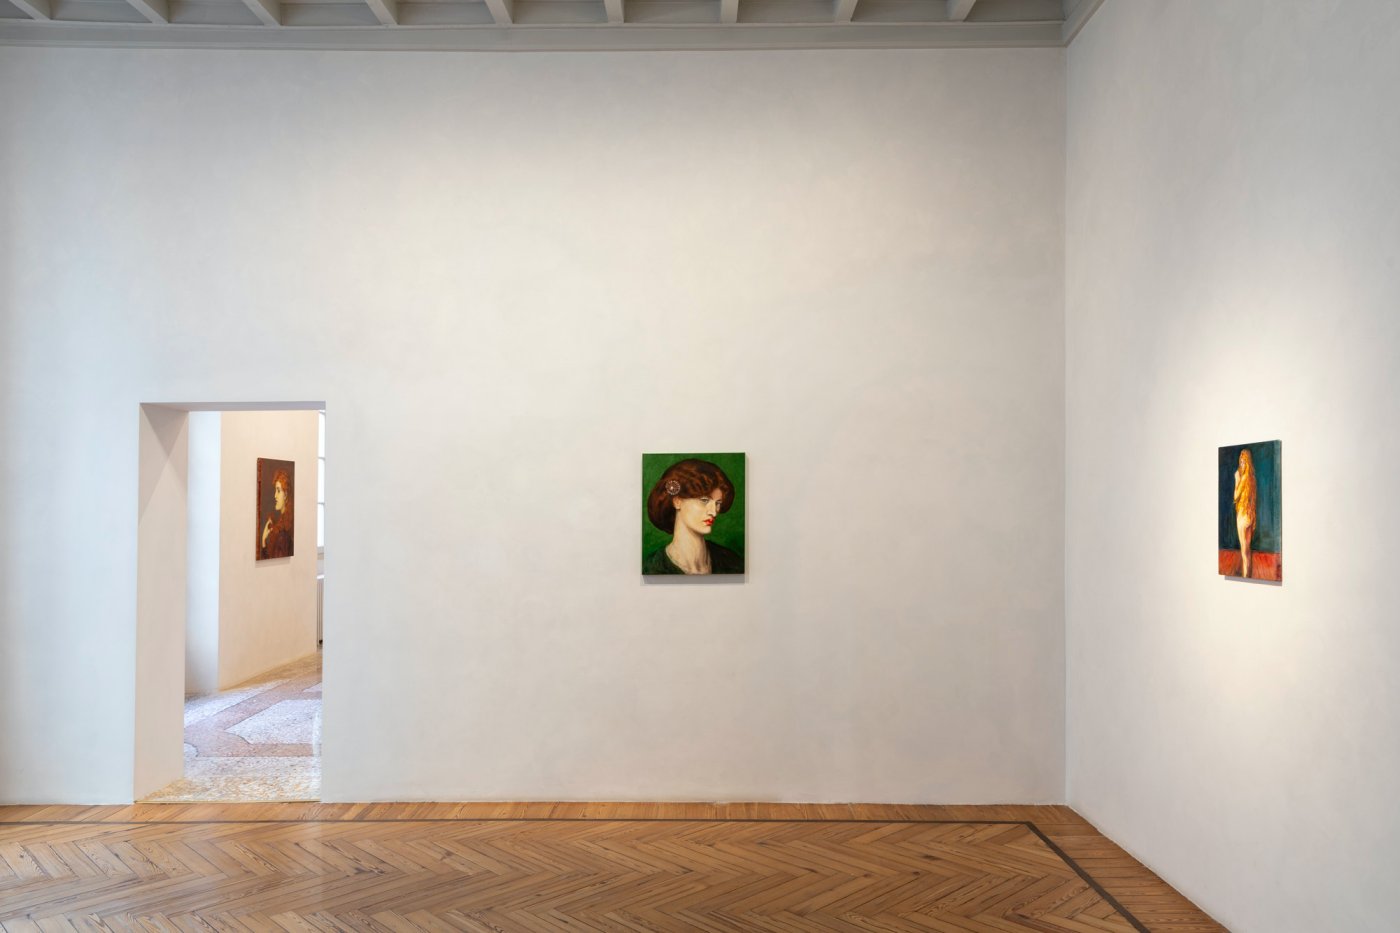 Installation image for Piotr Uklanski: How they met themselves, at MASSIMODECARLO